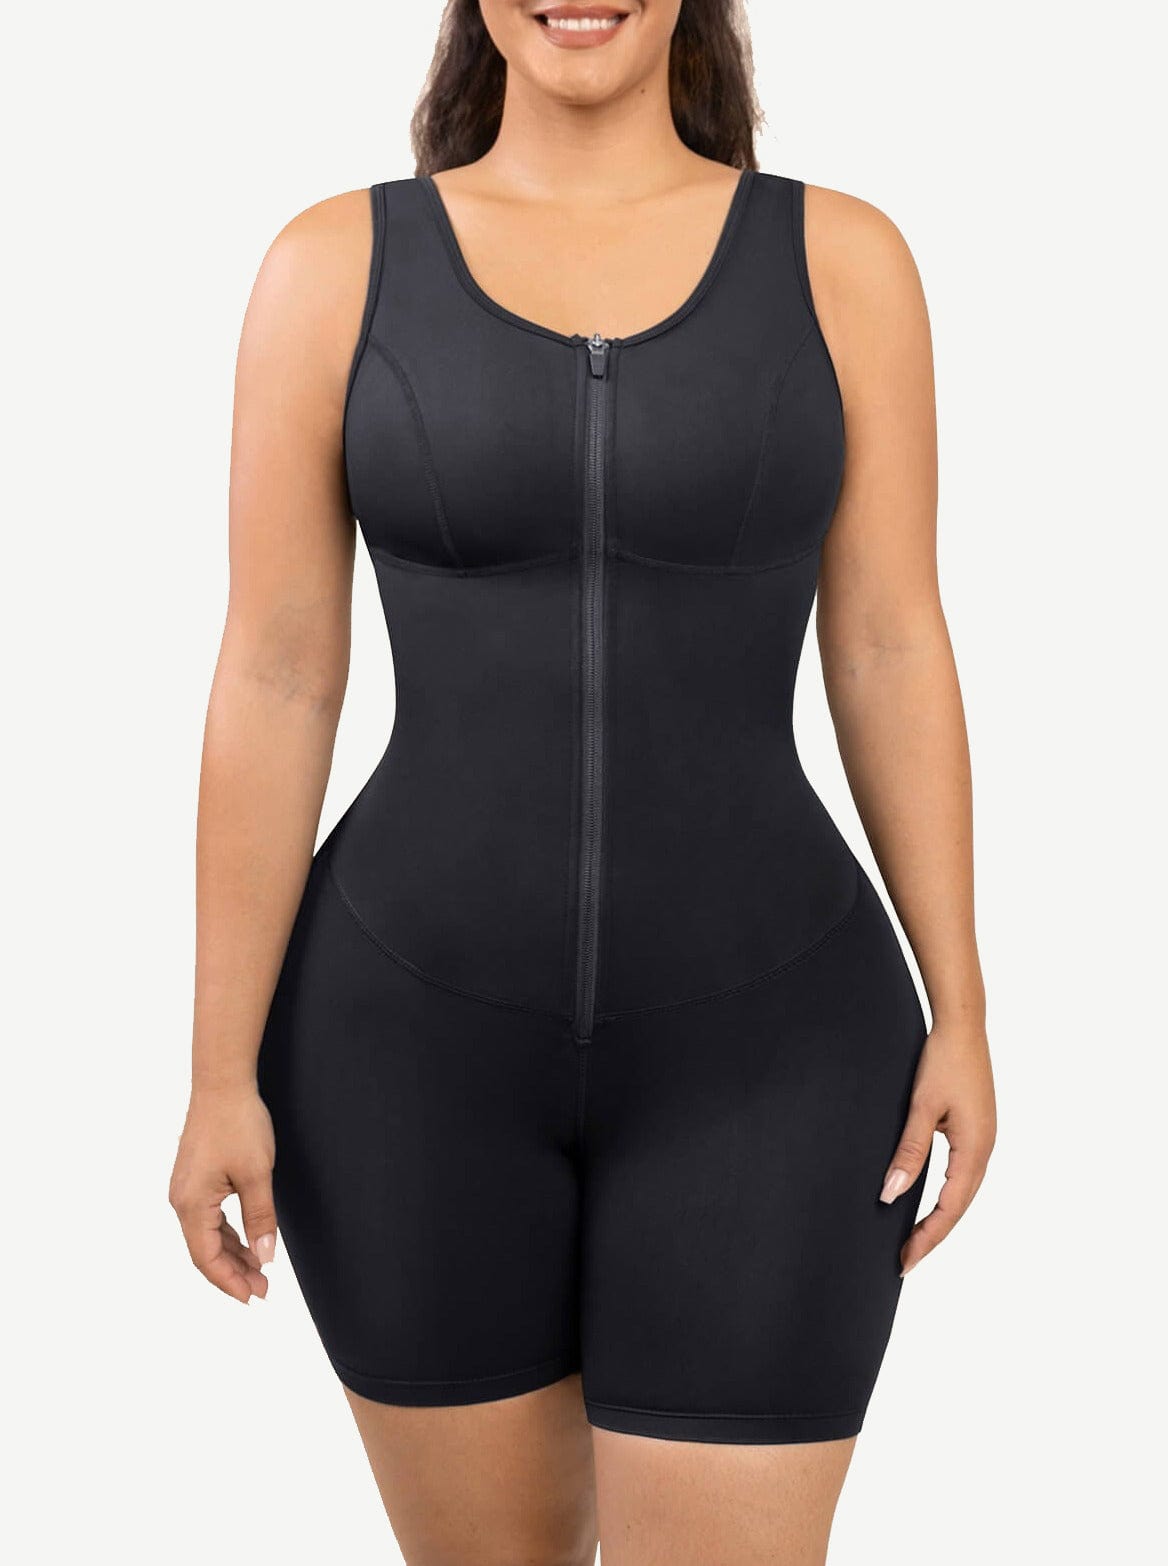 Wholesale Plus Size Shapewear To Create Slim And Fit Looking